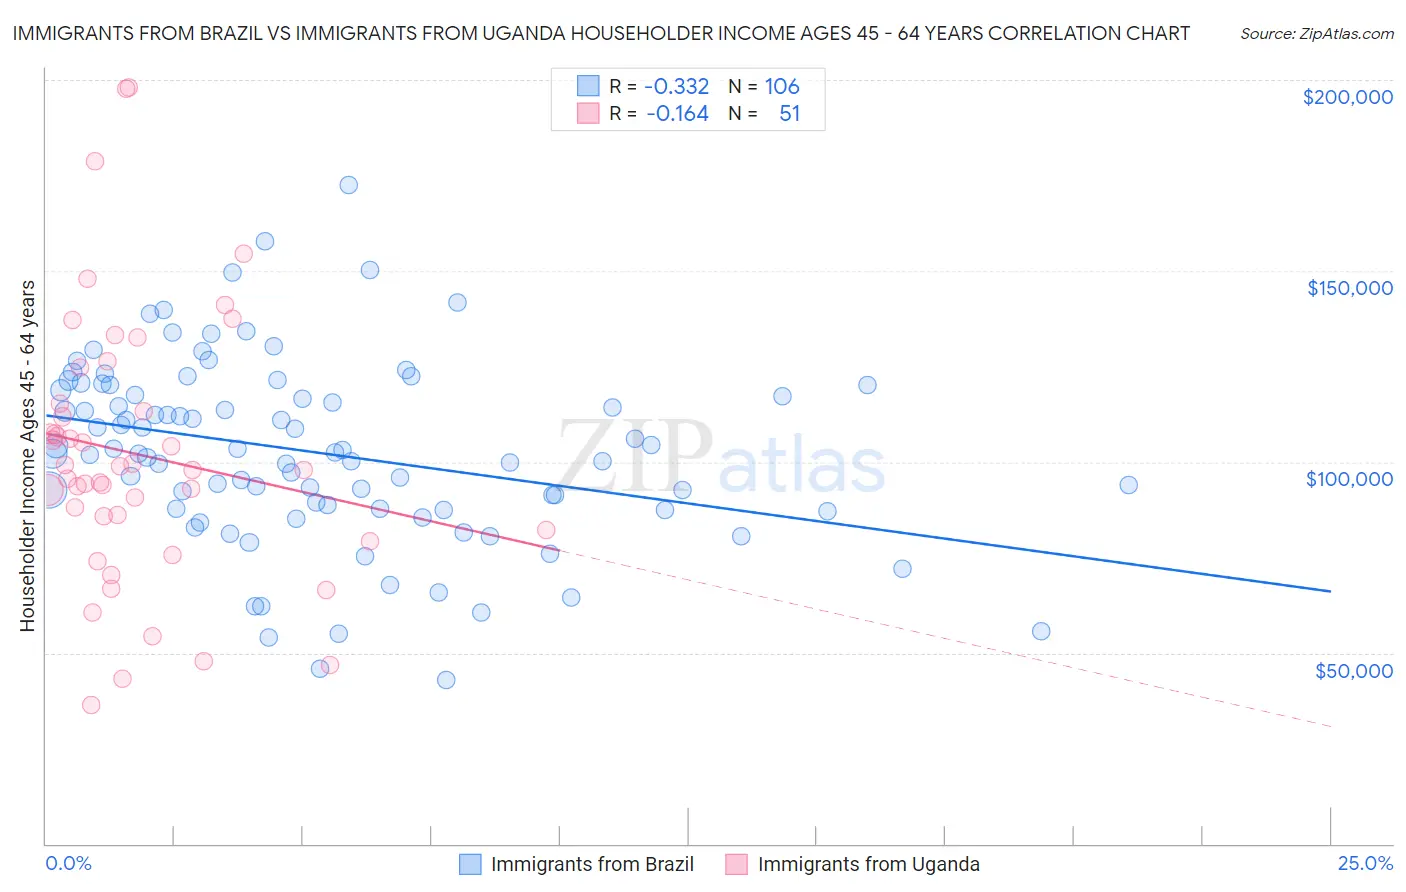 Immigrants from Brazil vs Immigrants from Uganda Householder Income Ages 45 - 64 years